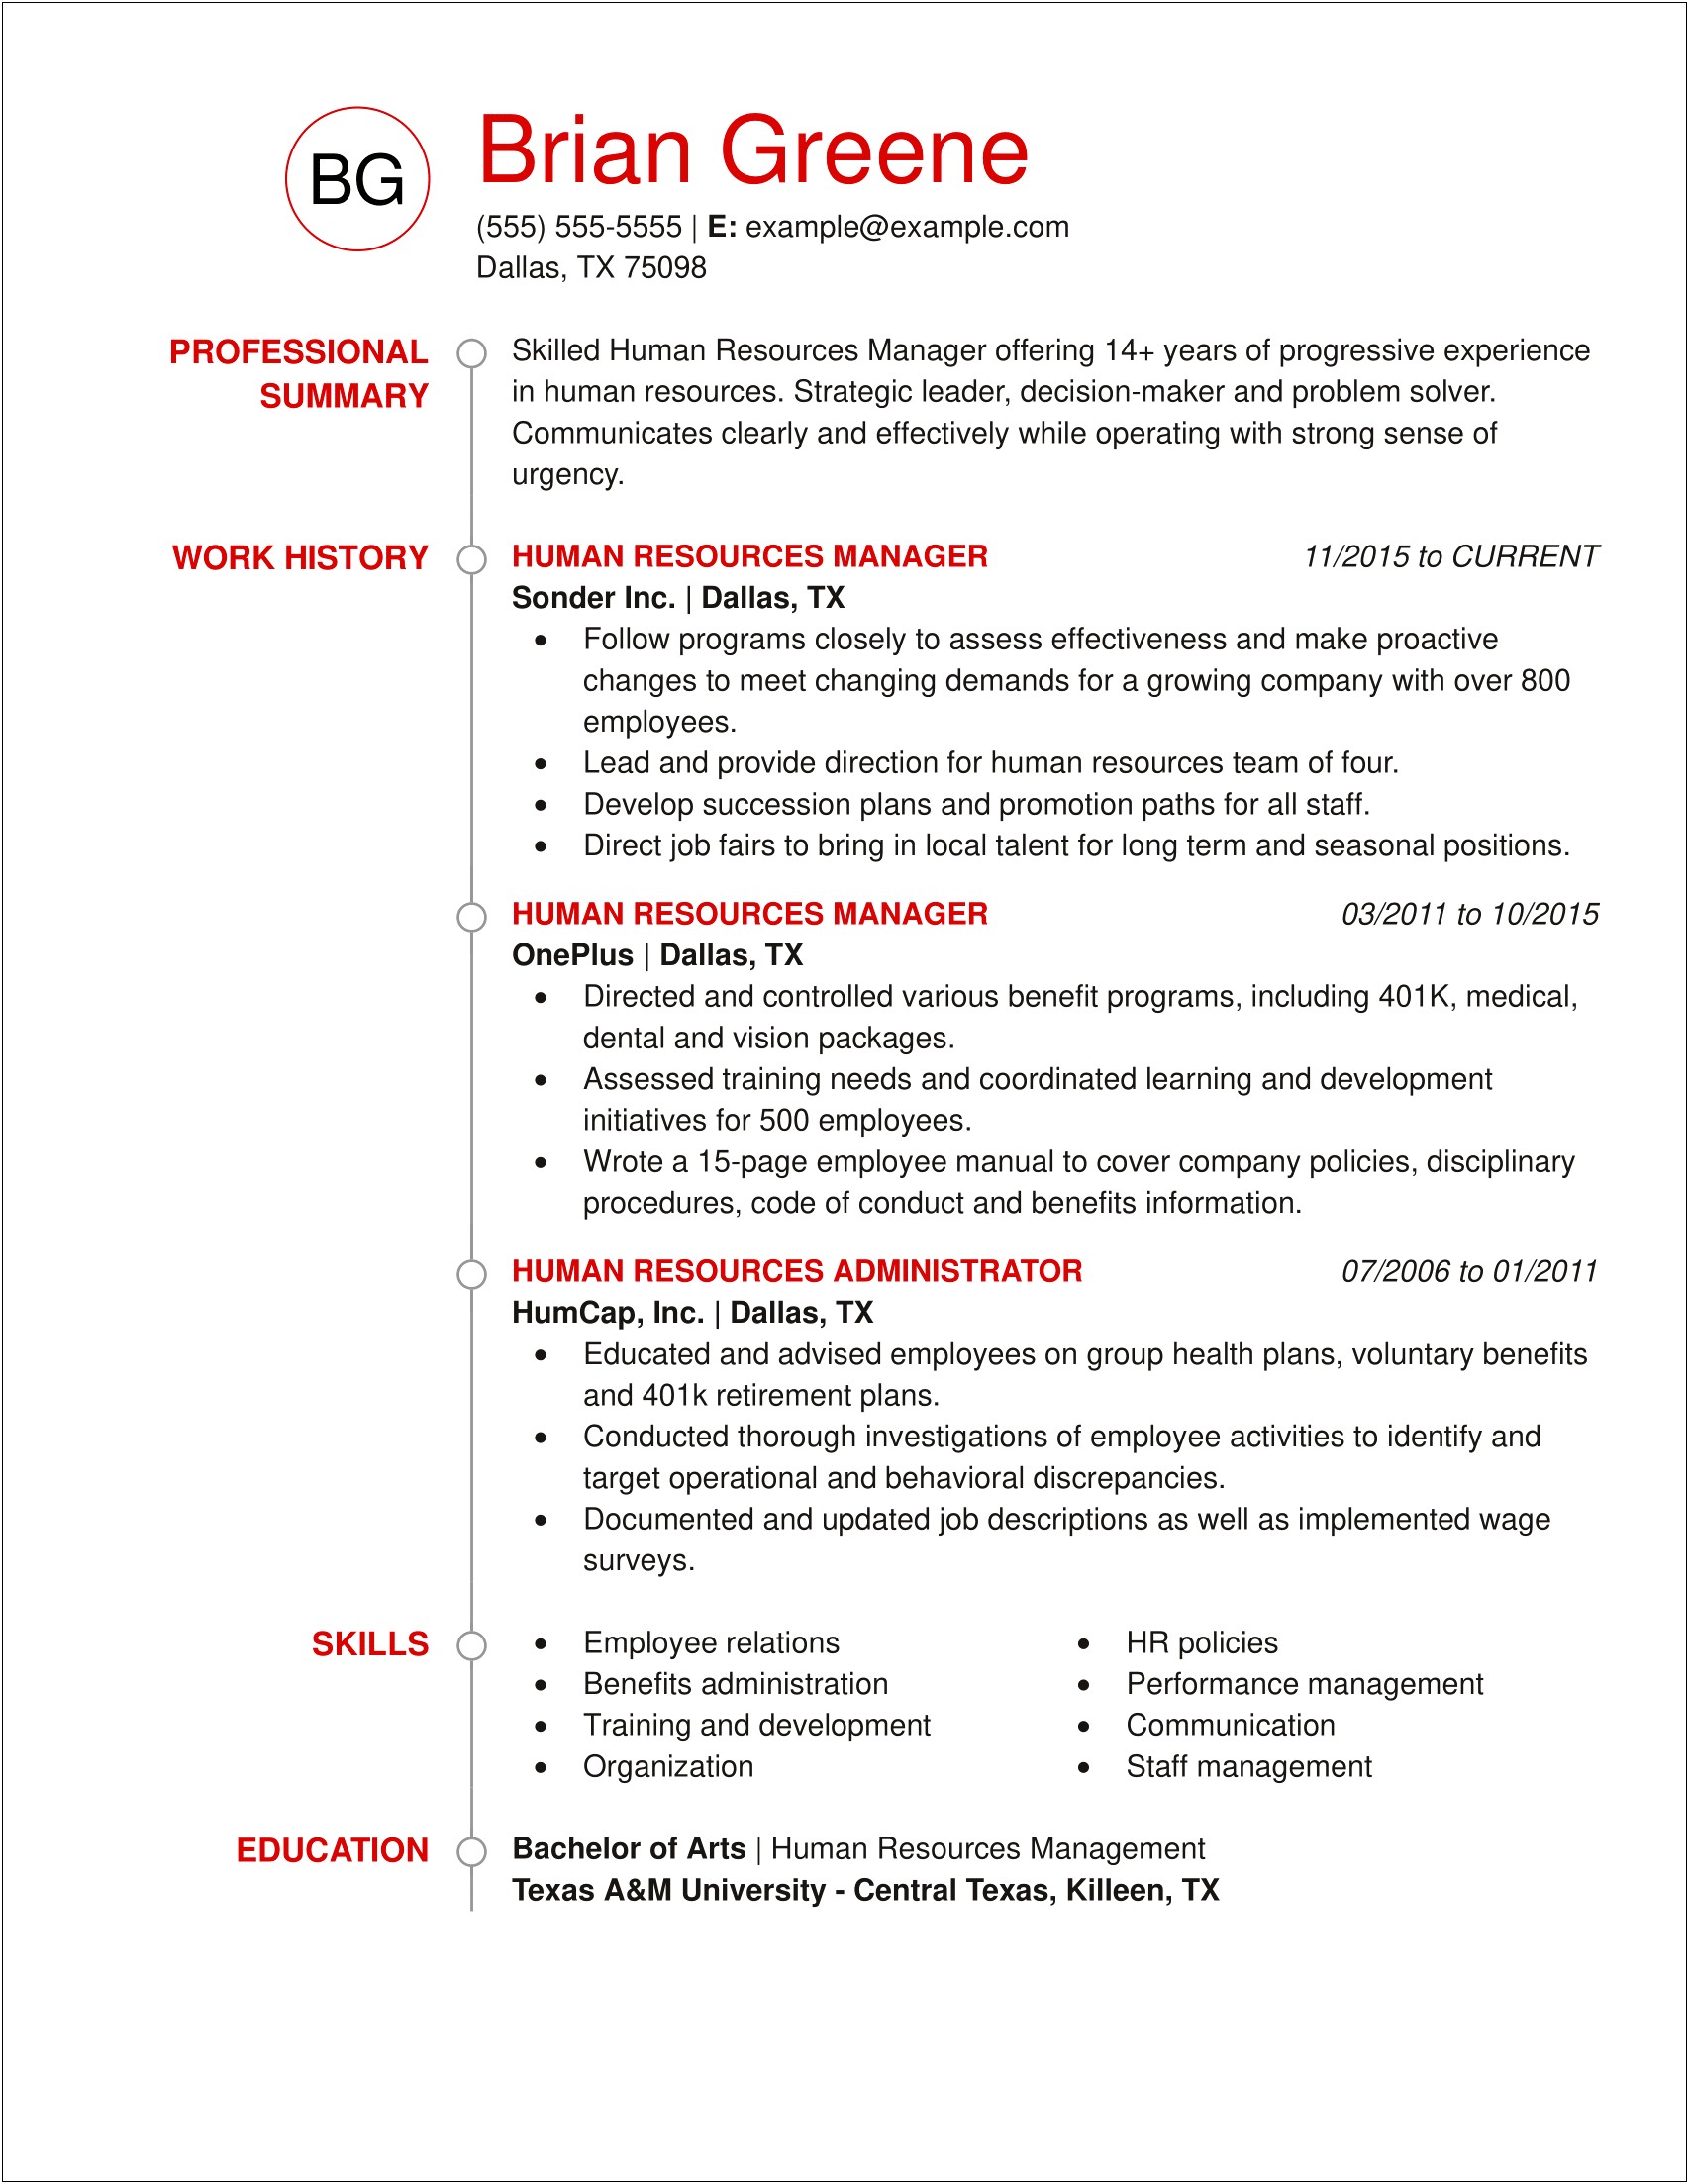 Top Resume Summary Examples For Benefits Specialist